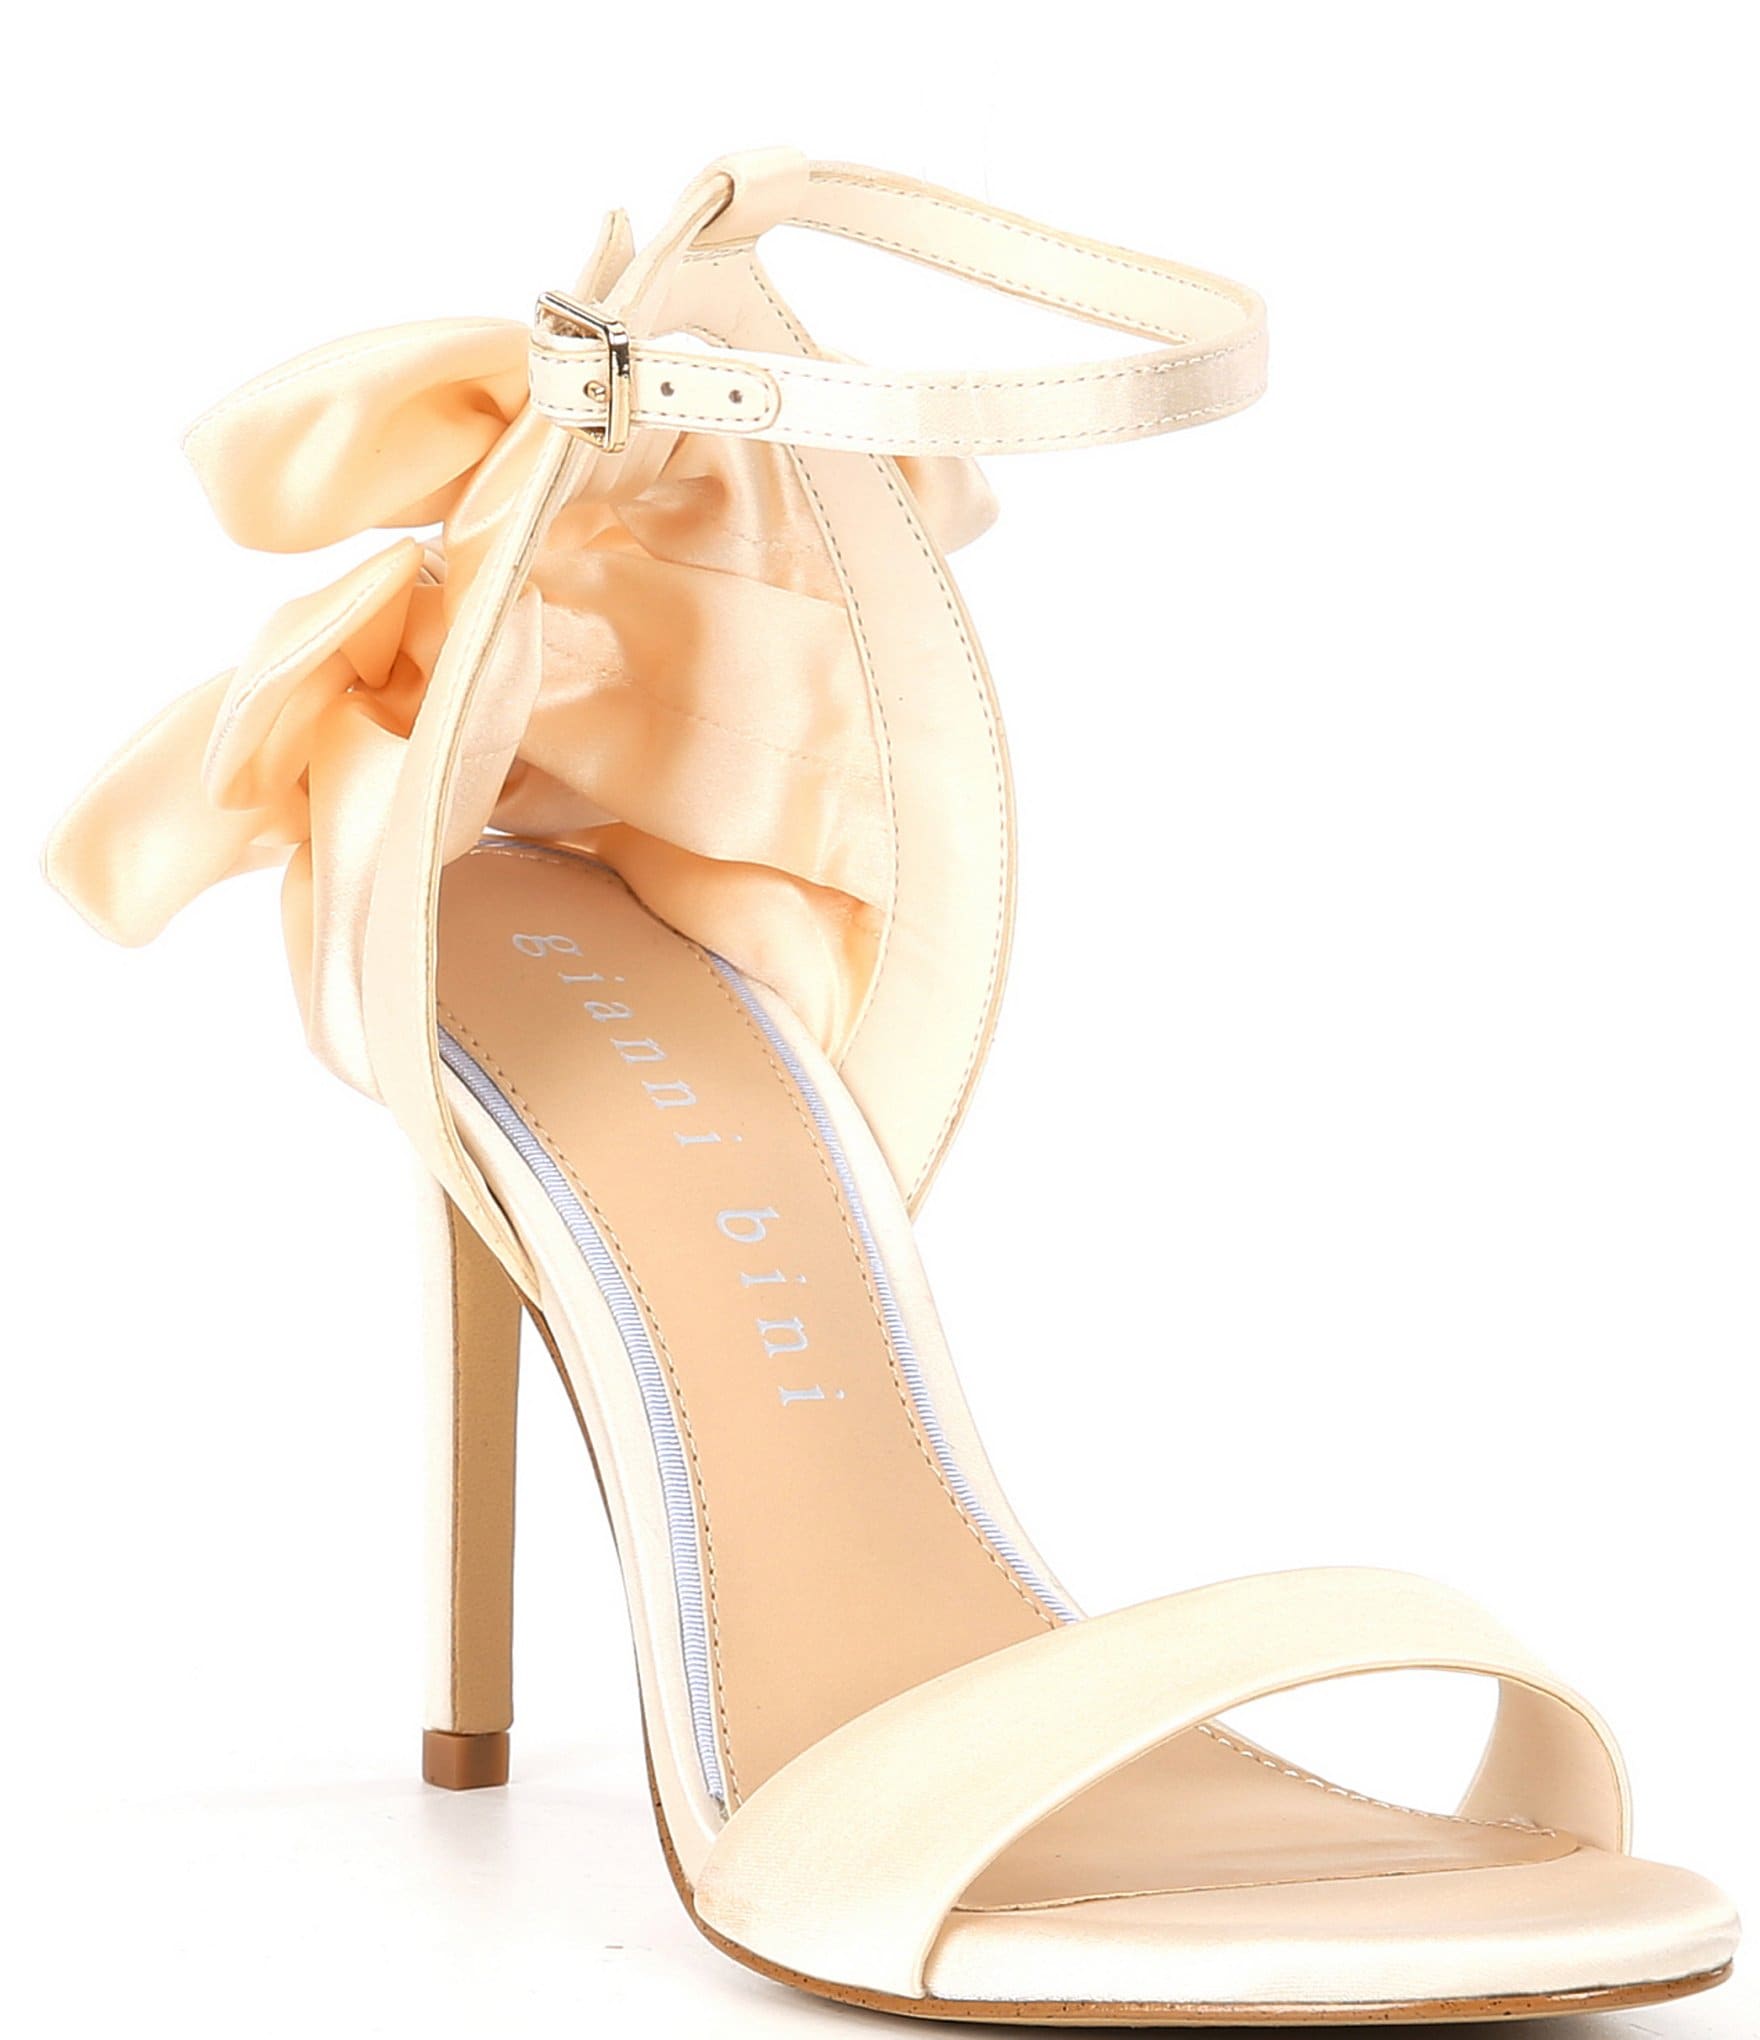 Gianni Bini Bridal Collection Ansley Satin Bow Back Dress Sandals ...